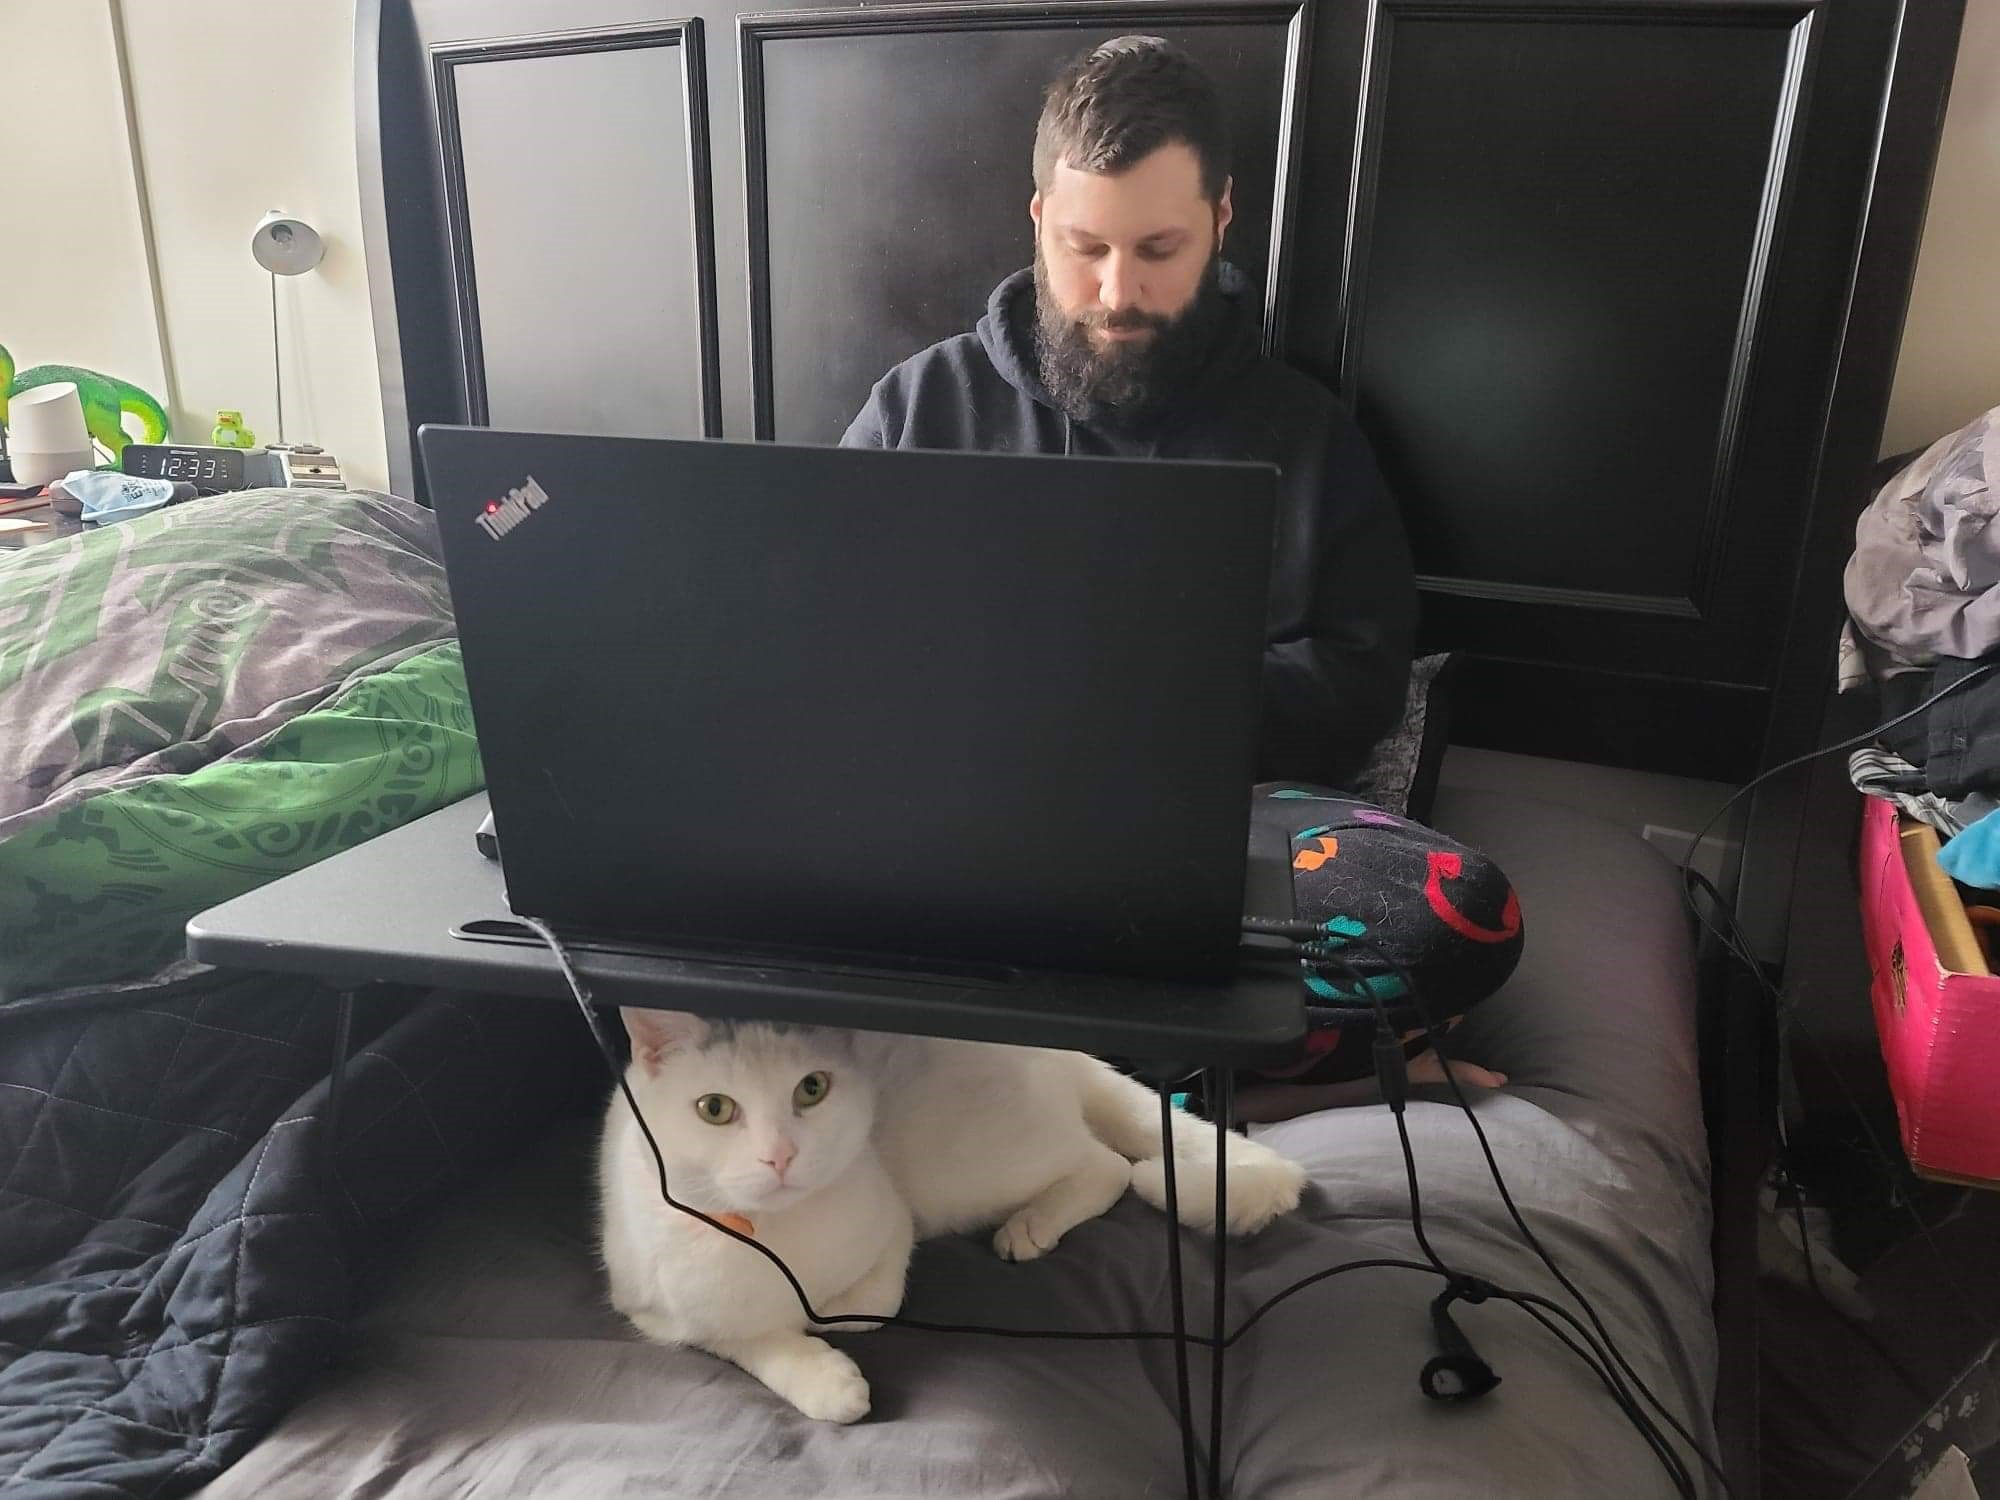 A man and a cat sitting on a bed with a laptop